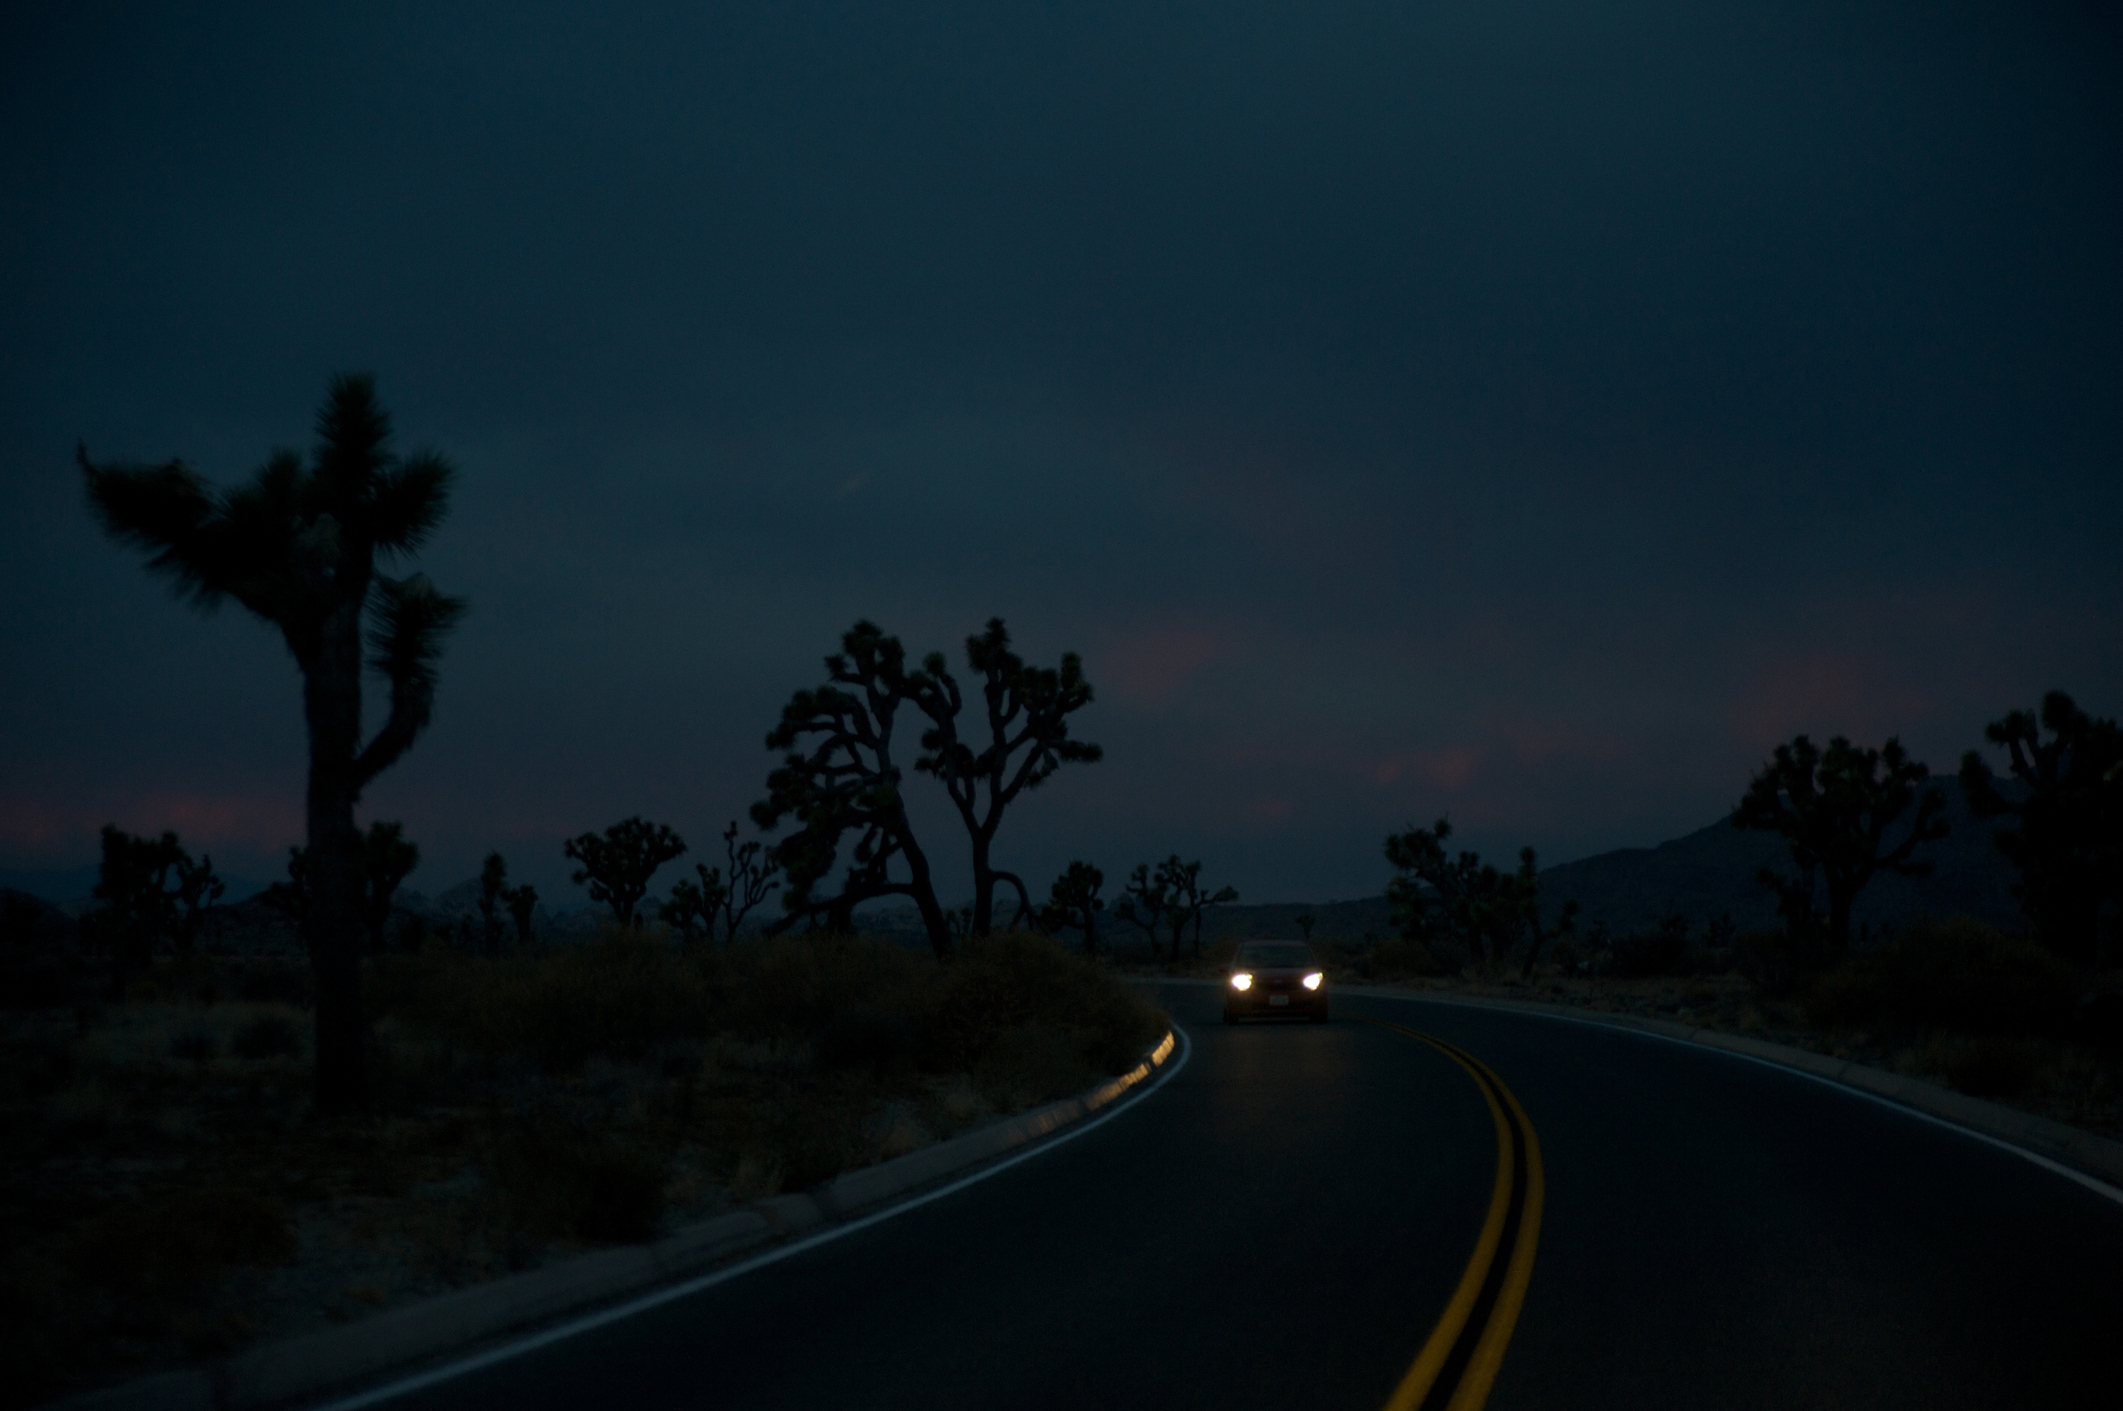 A car drives on a curvy road at dusk with silhouettes of Joshua trees against a twilight sky